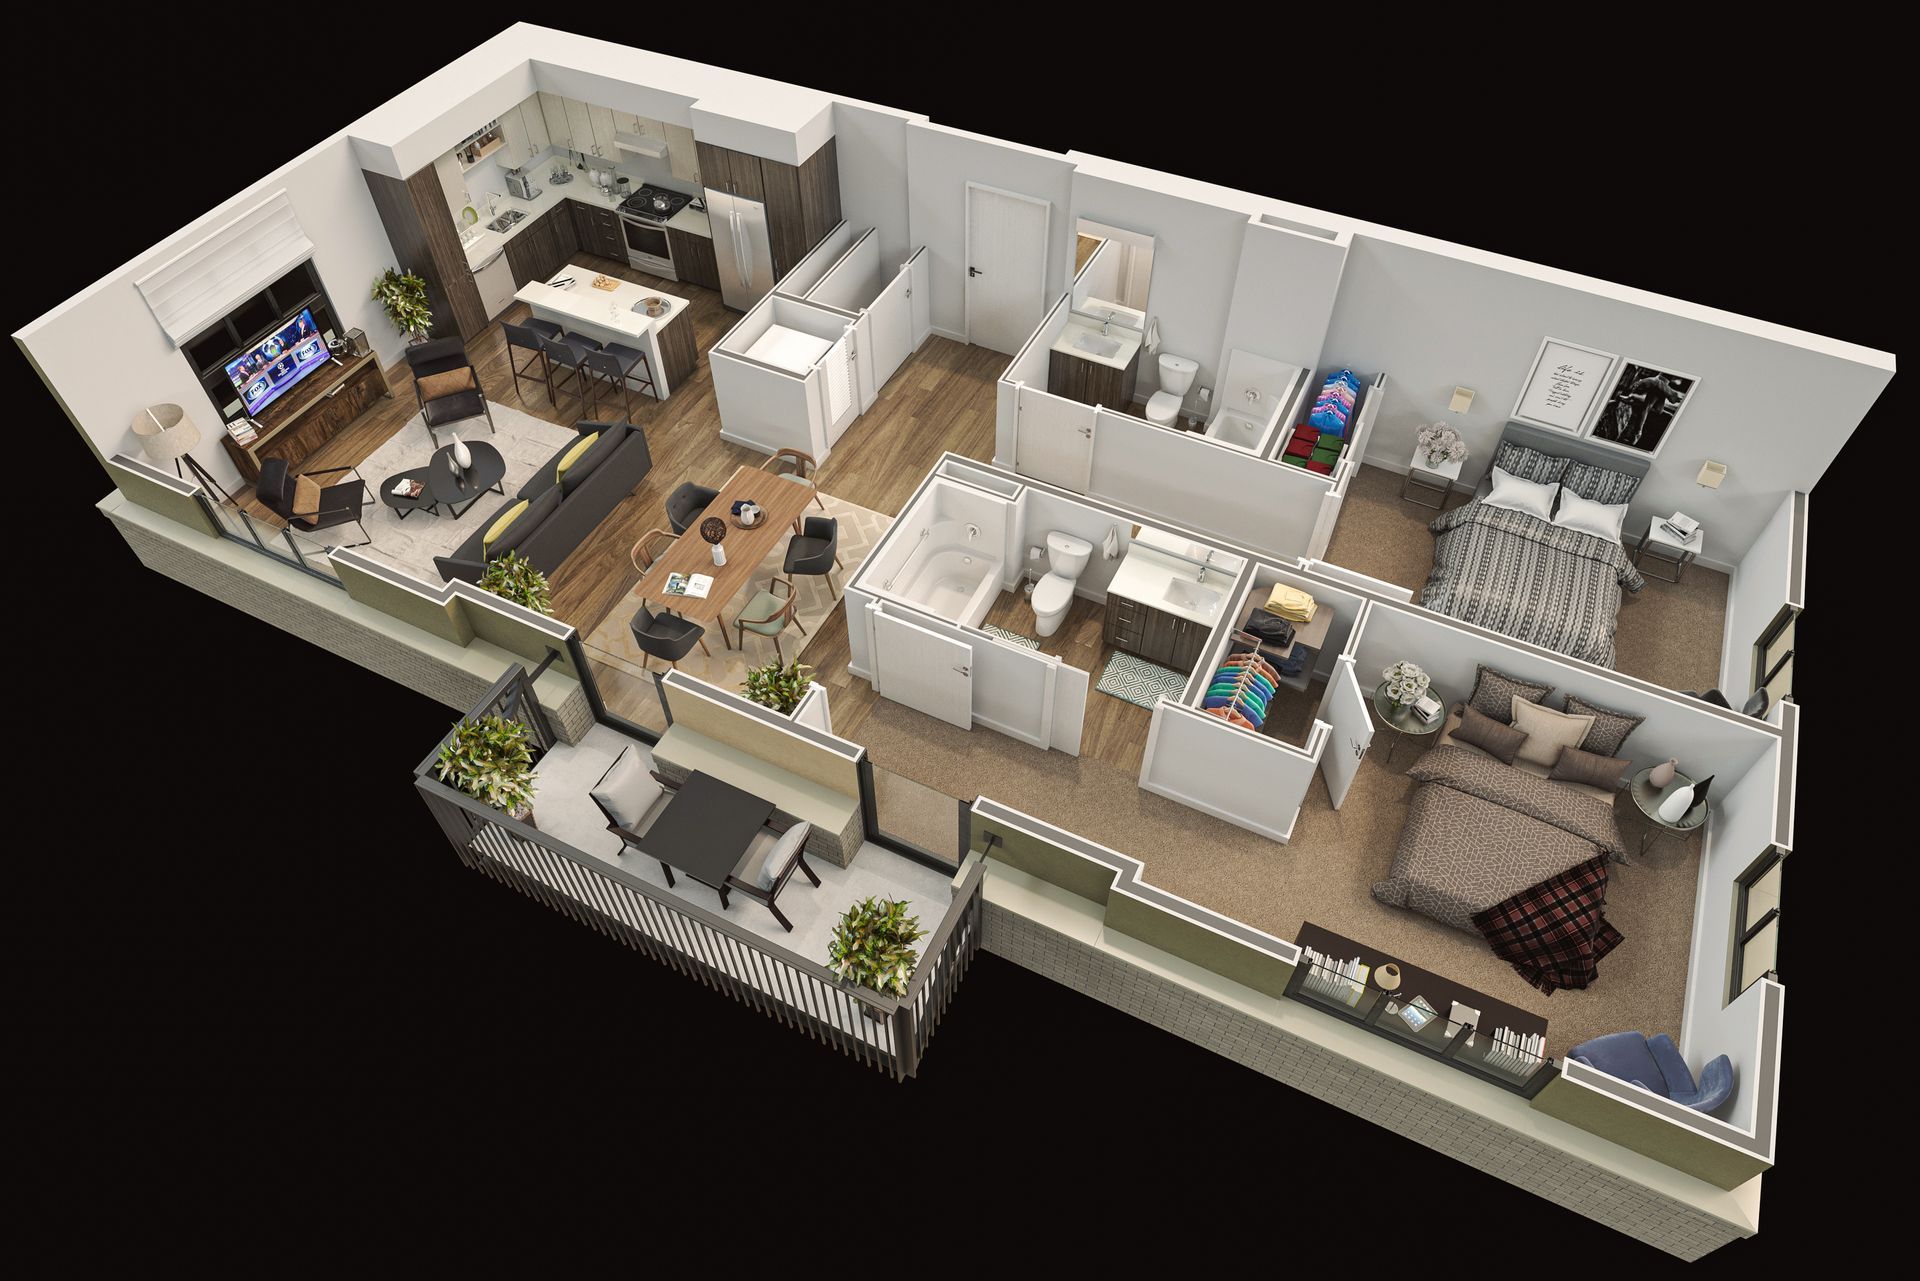 The 5th Avenue Unfurnished floor plan